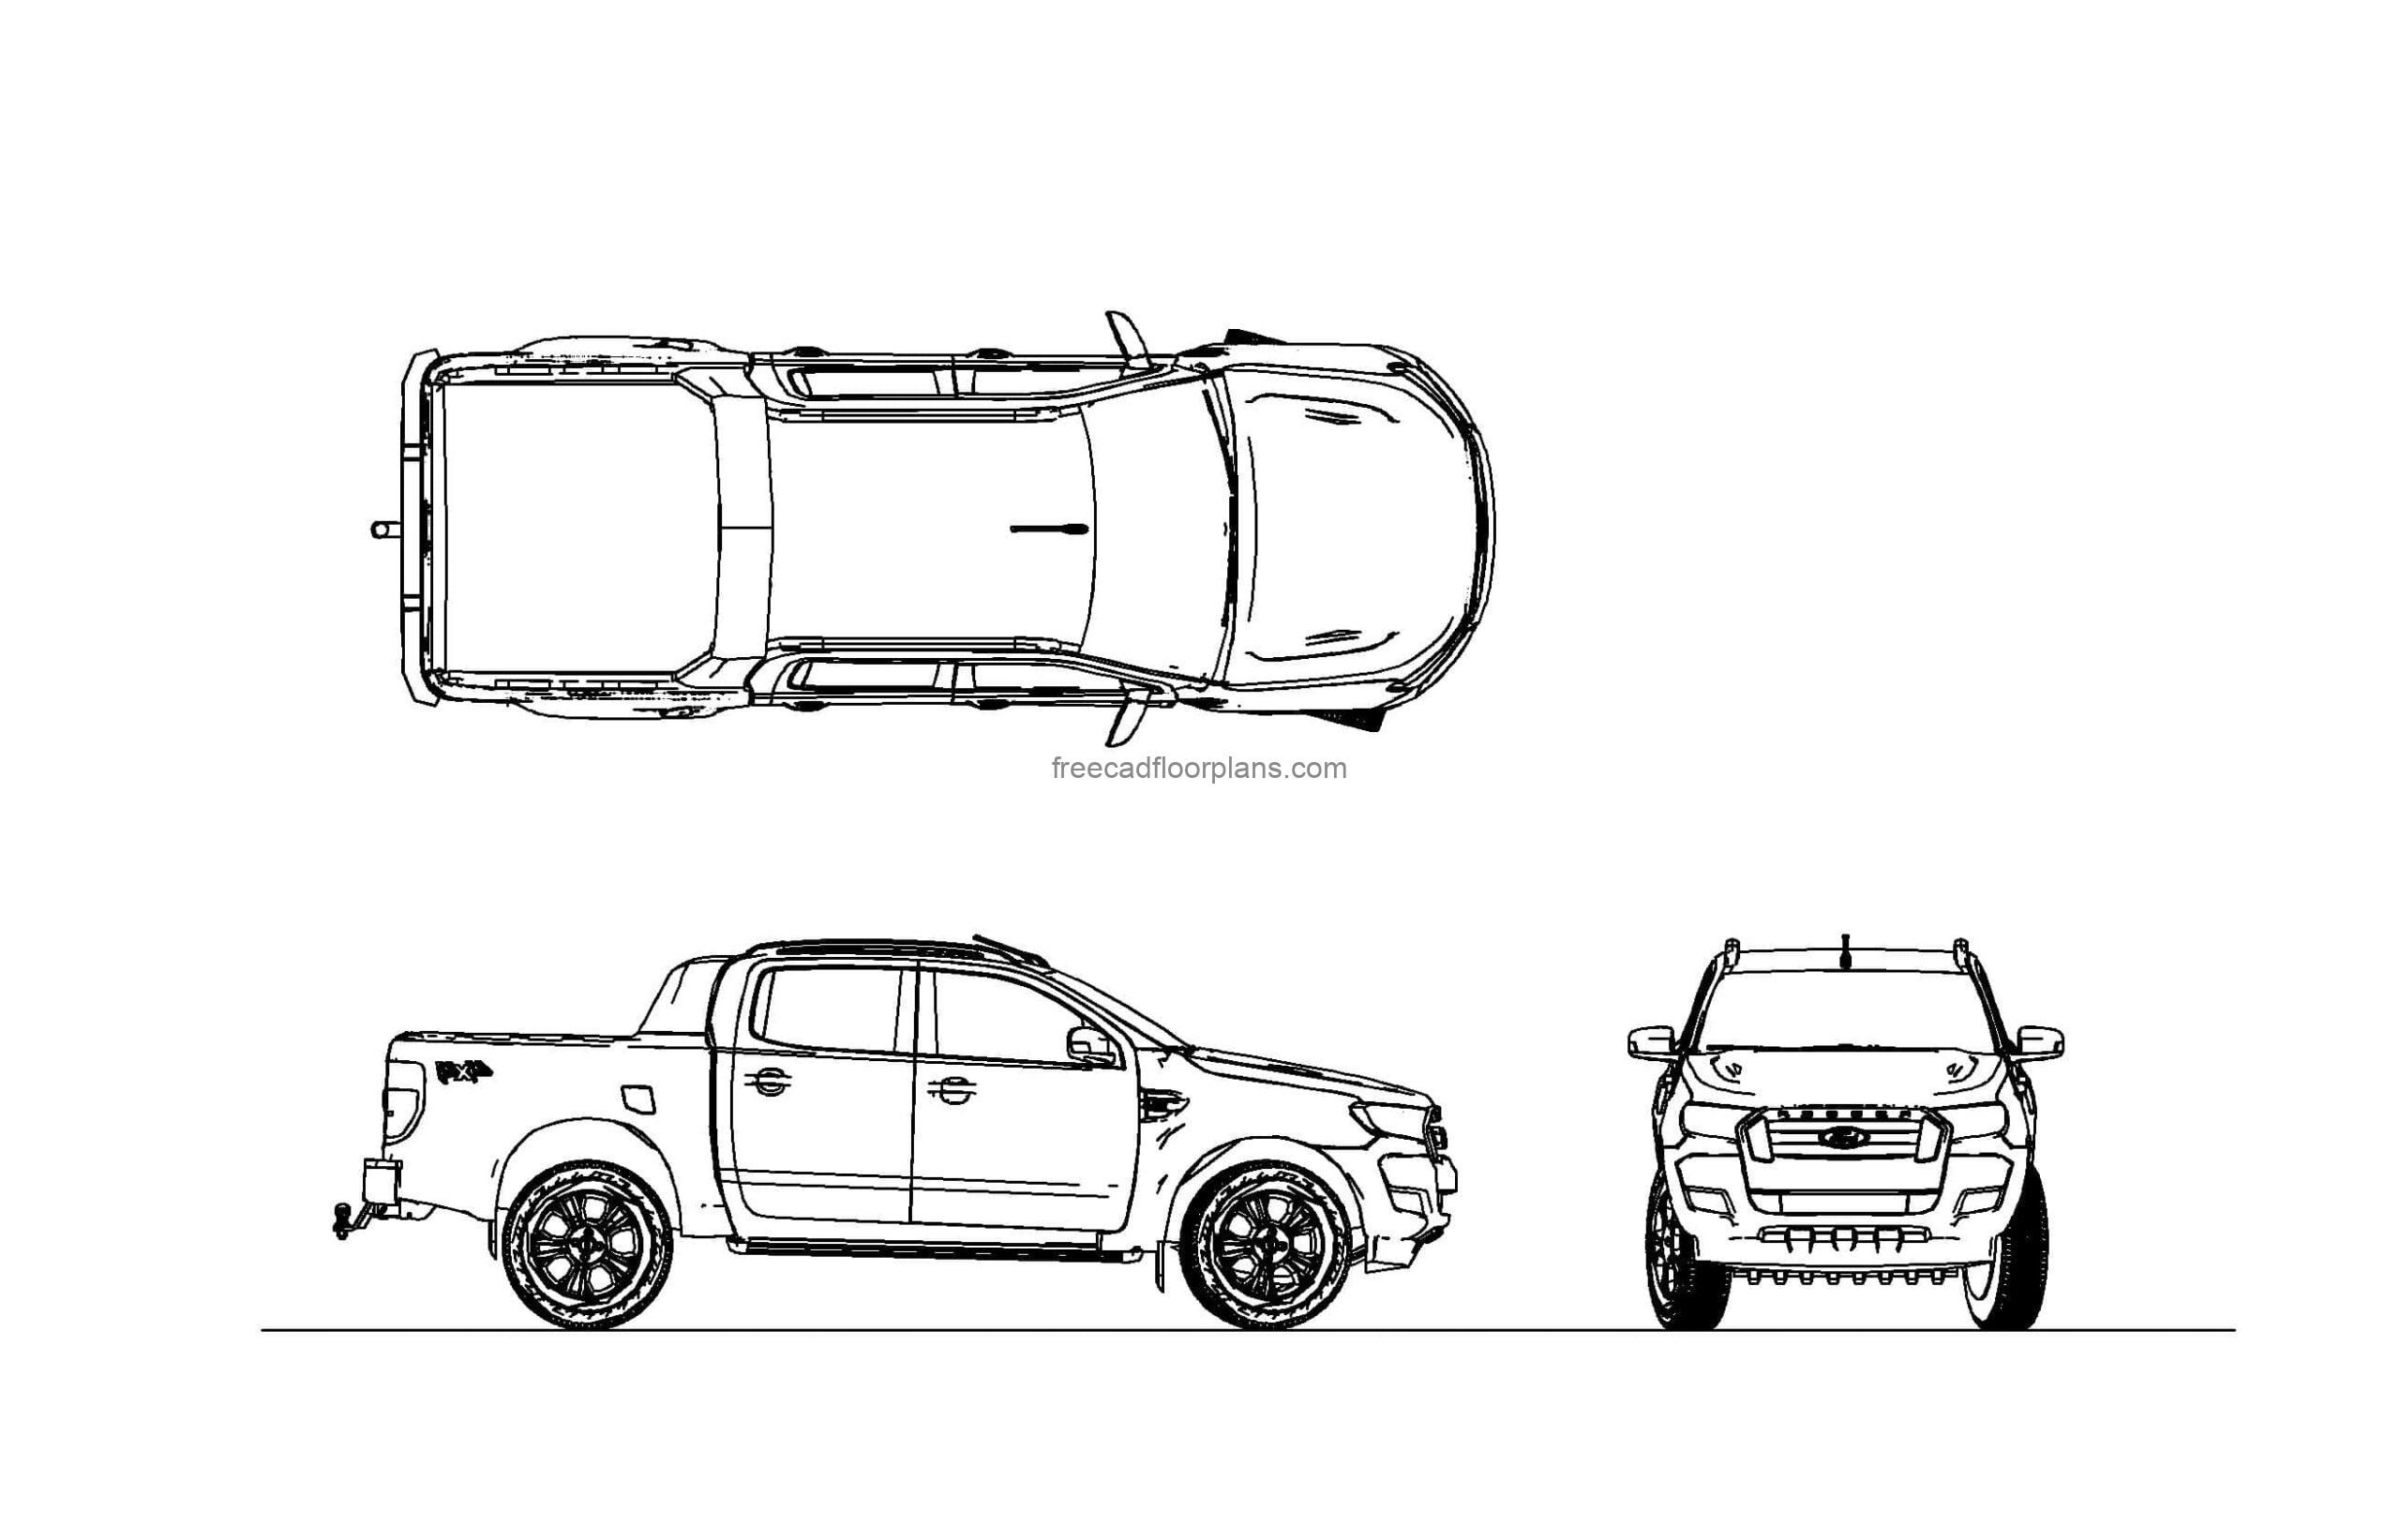 autocad drawing of a ford ranger pick up truck with all 2d views, plan and elevation, dwg file download for free